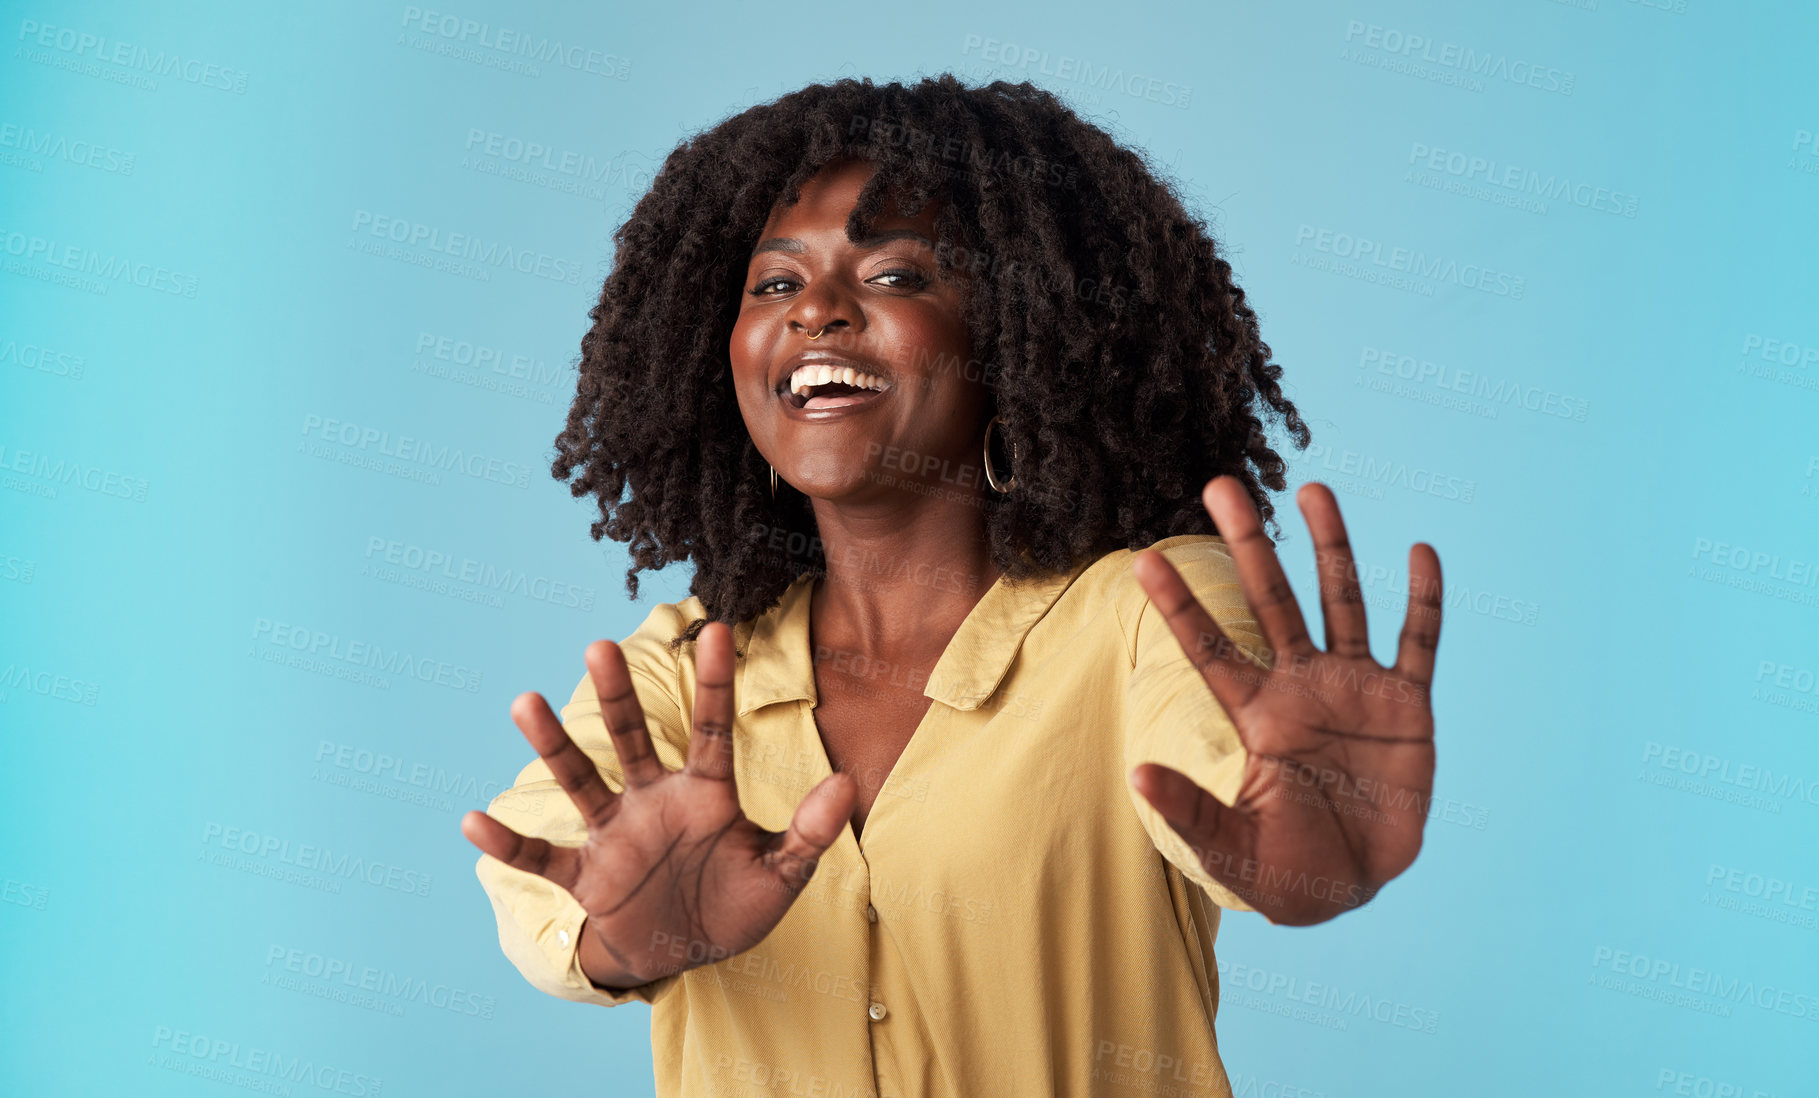 Buy stock photo Studio shot of an attractive young woman holding out her arms against a blue background